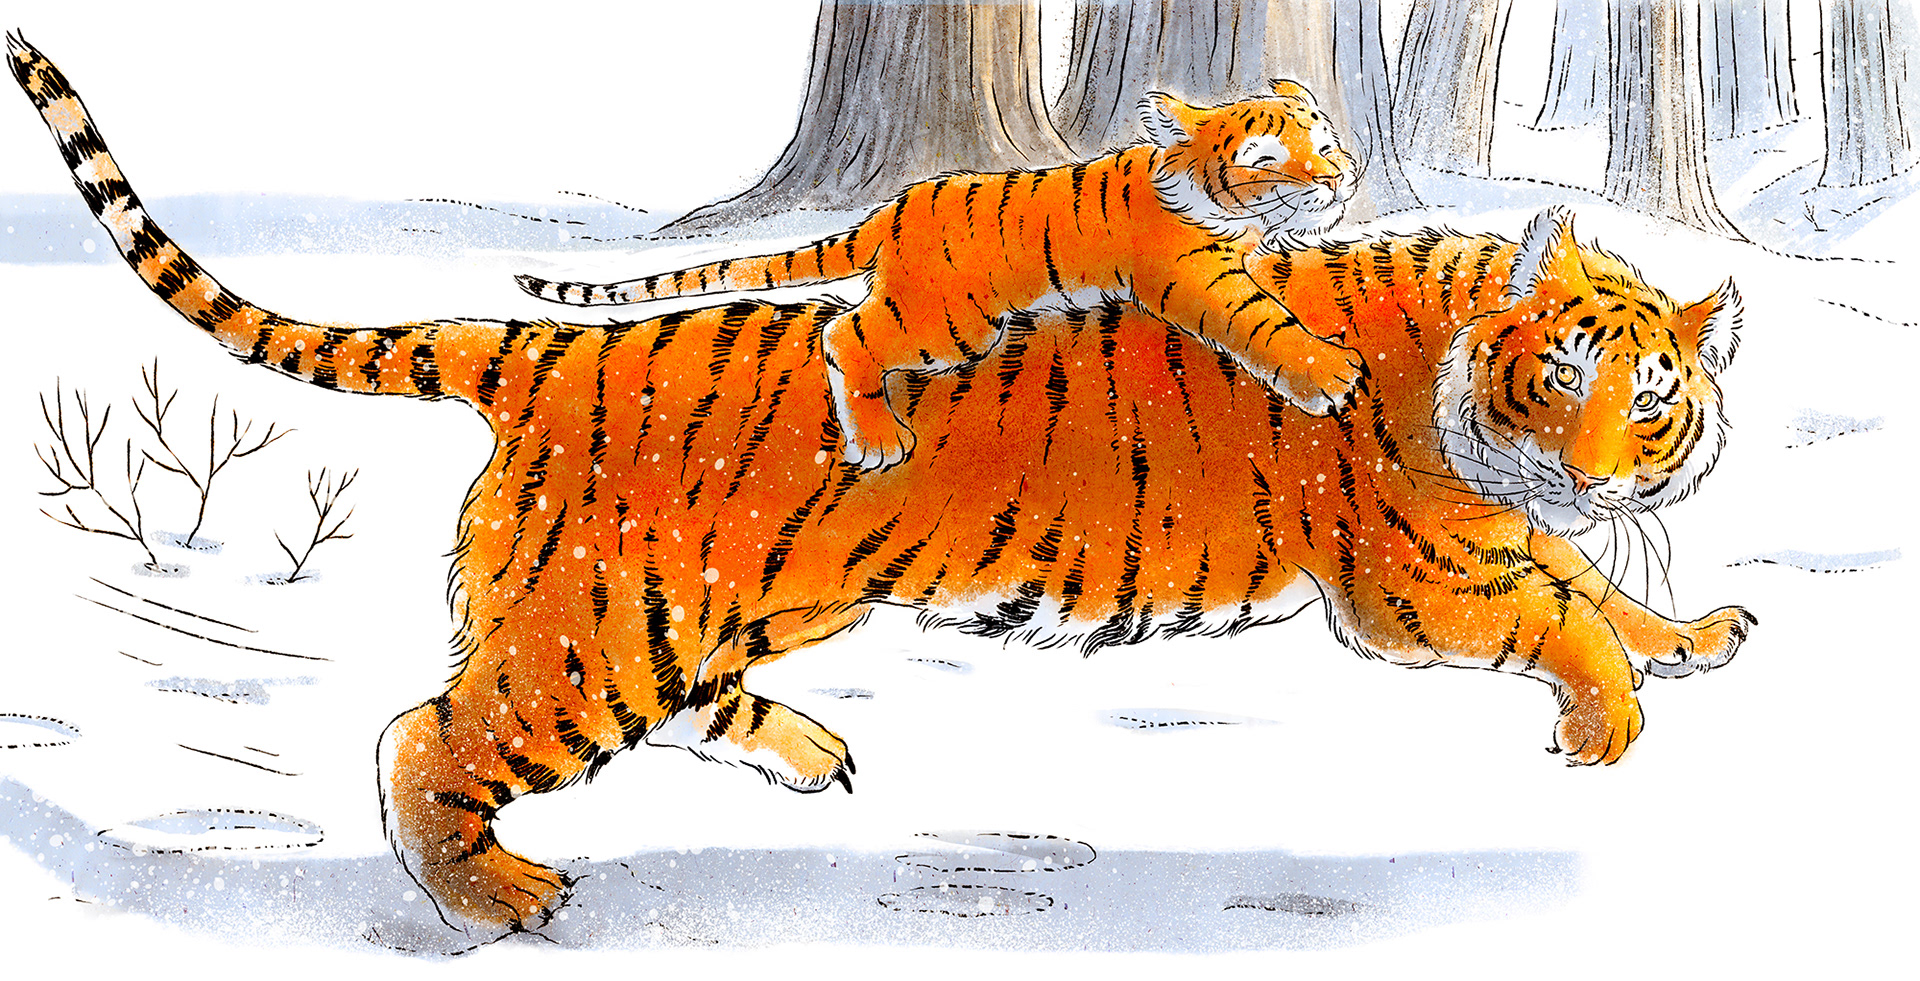 When your dad is a tiger | Behance